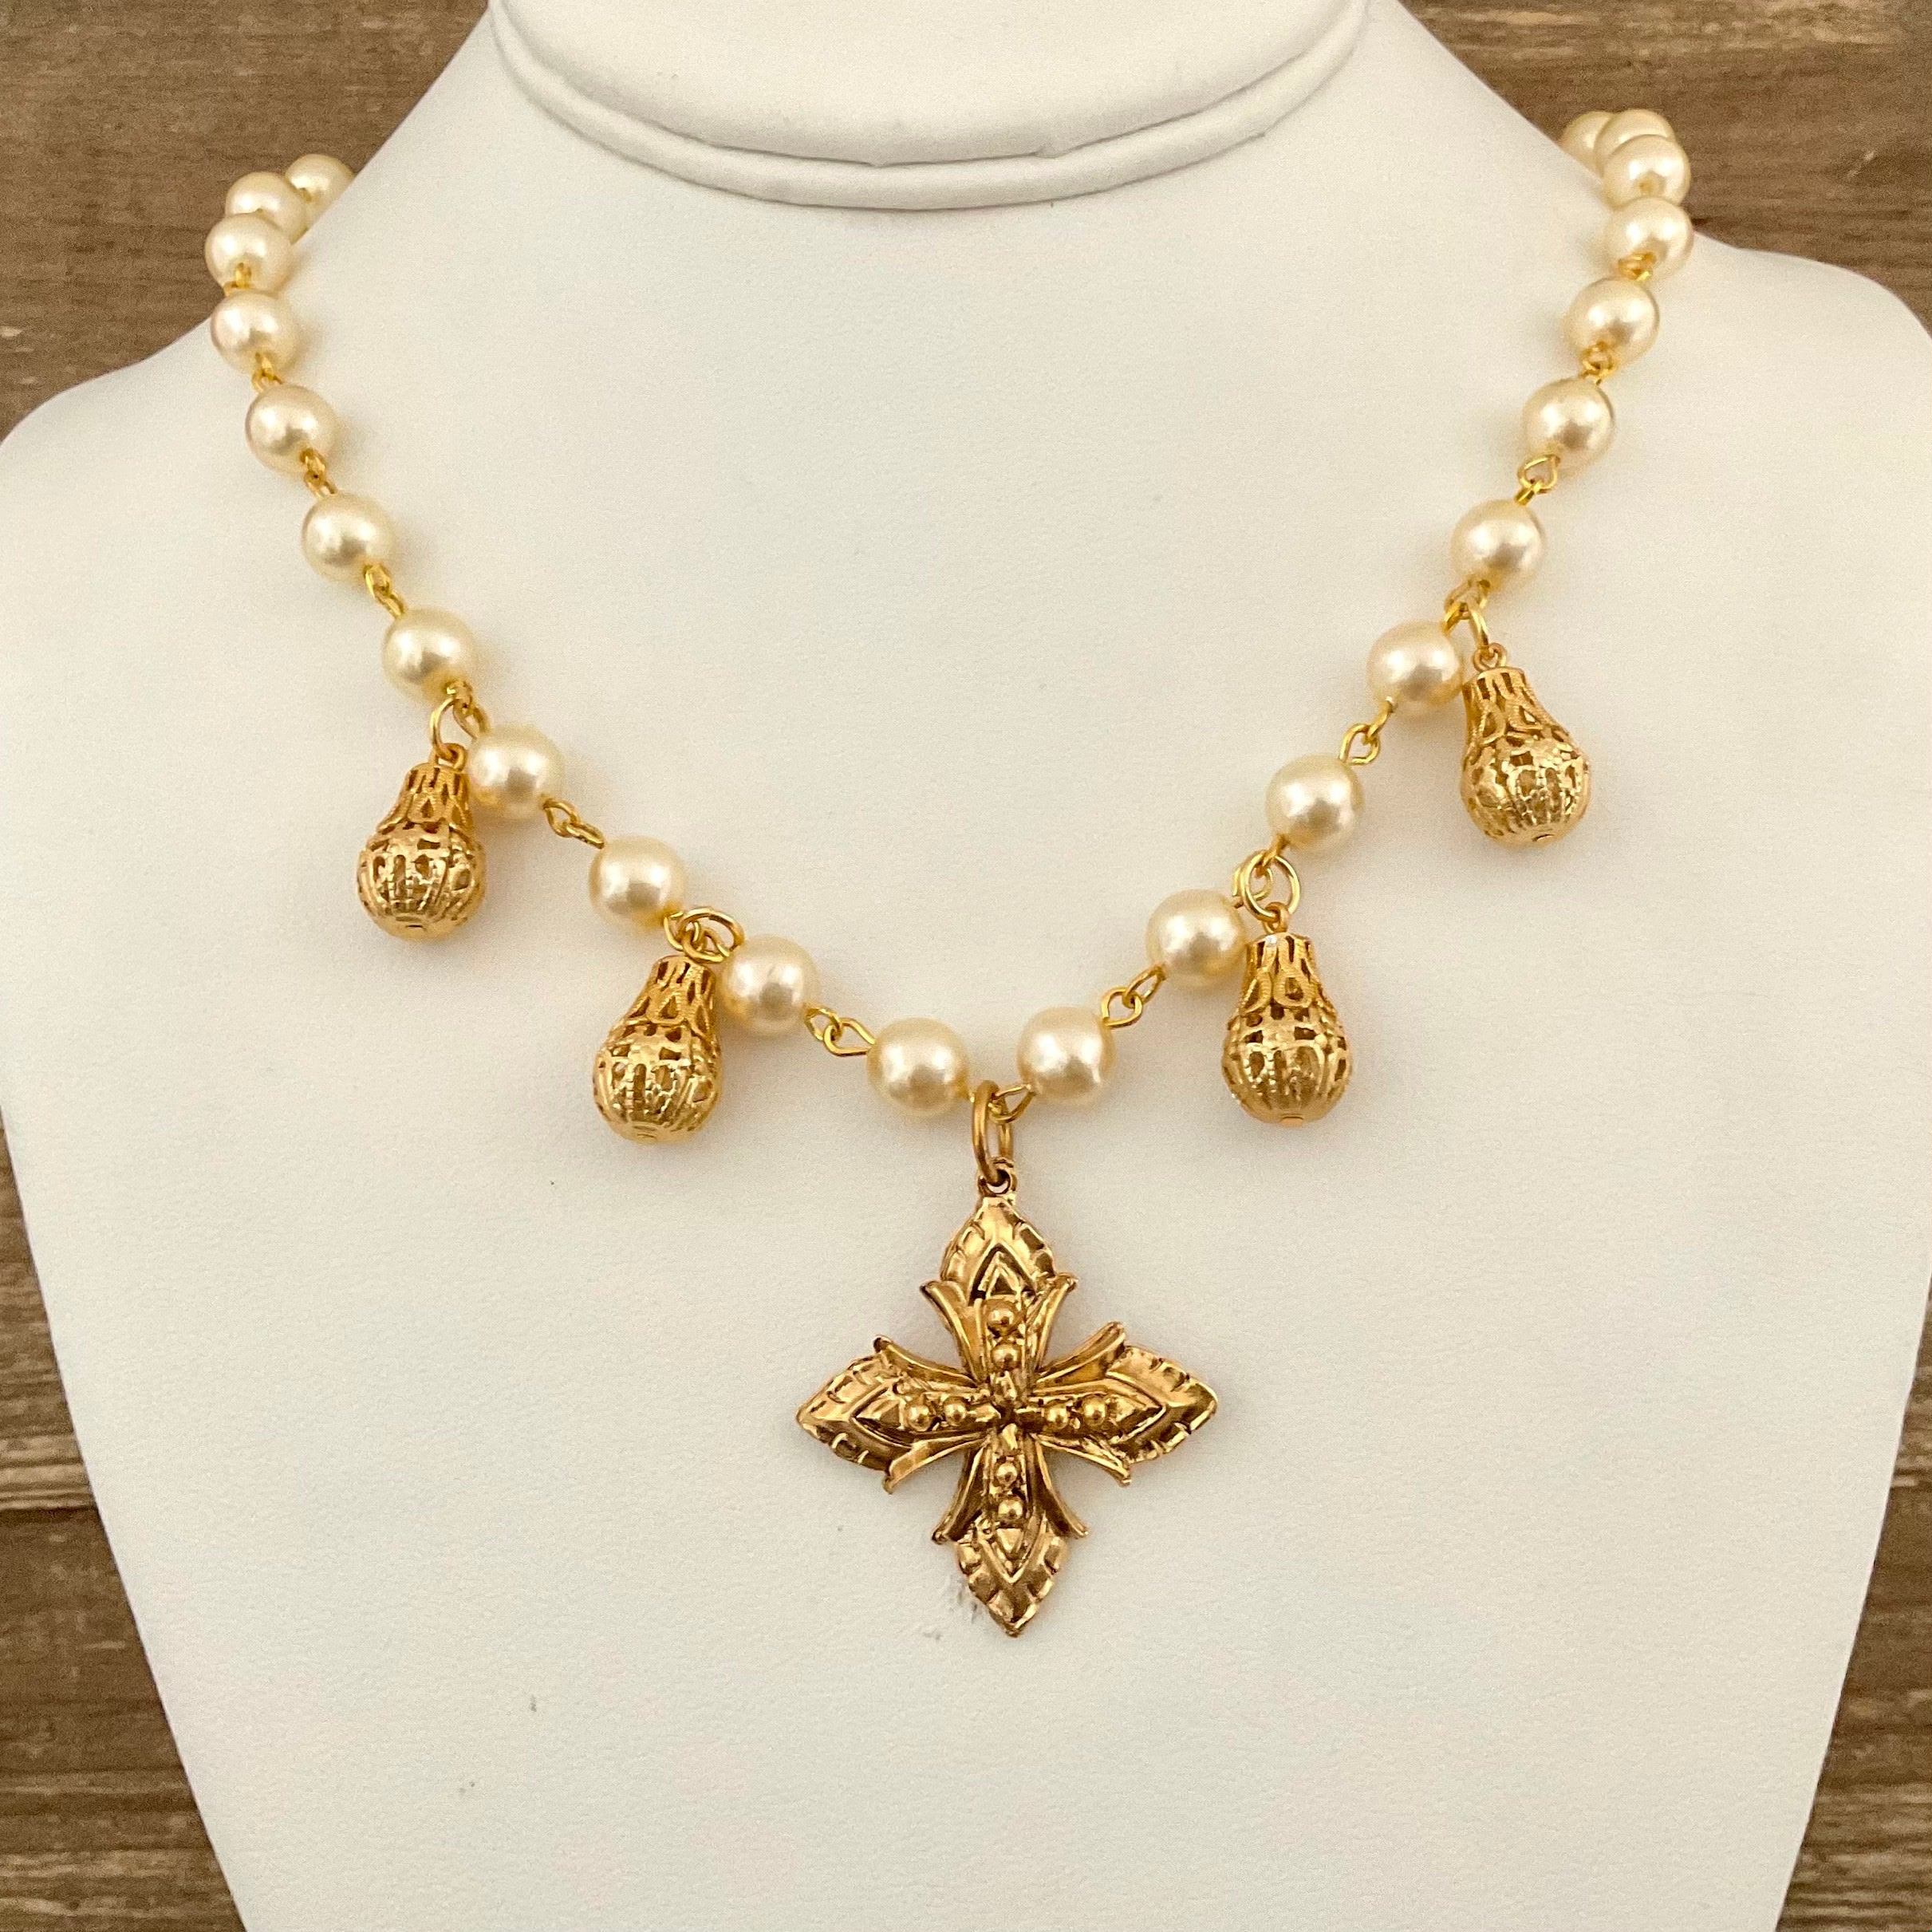 Vintage Pearl Necklace with Gold Cross & Drops 18"